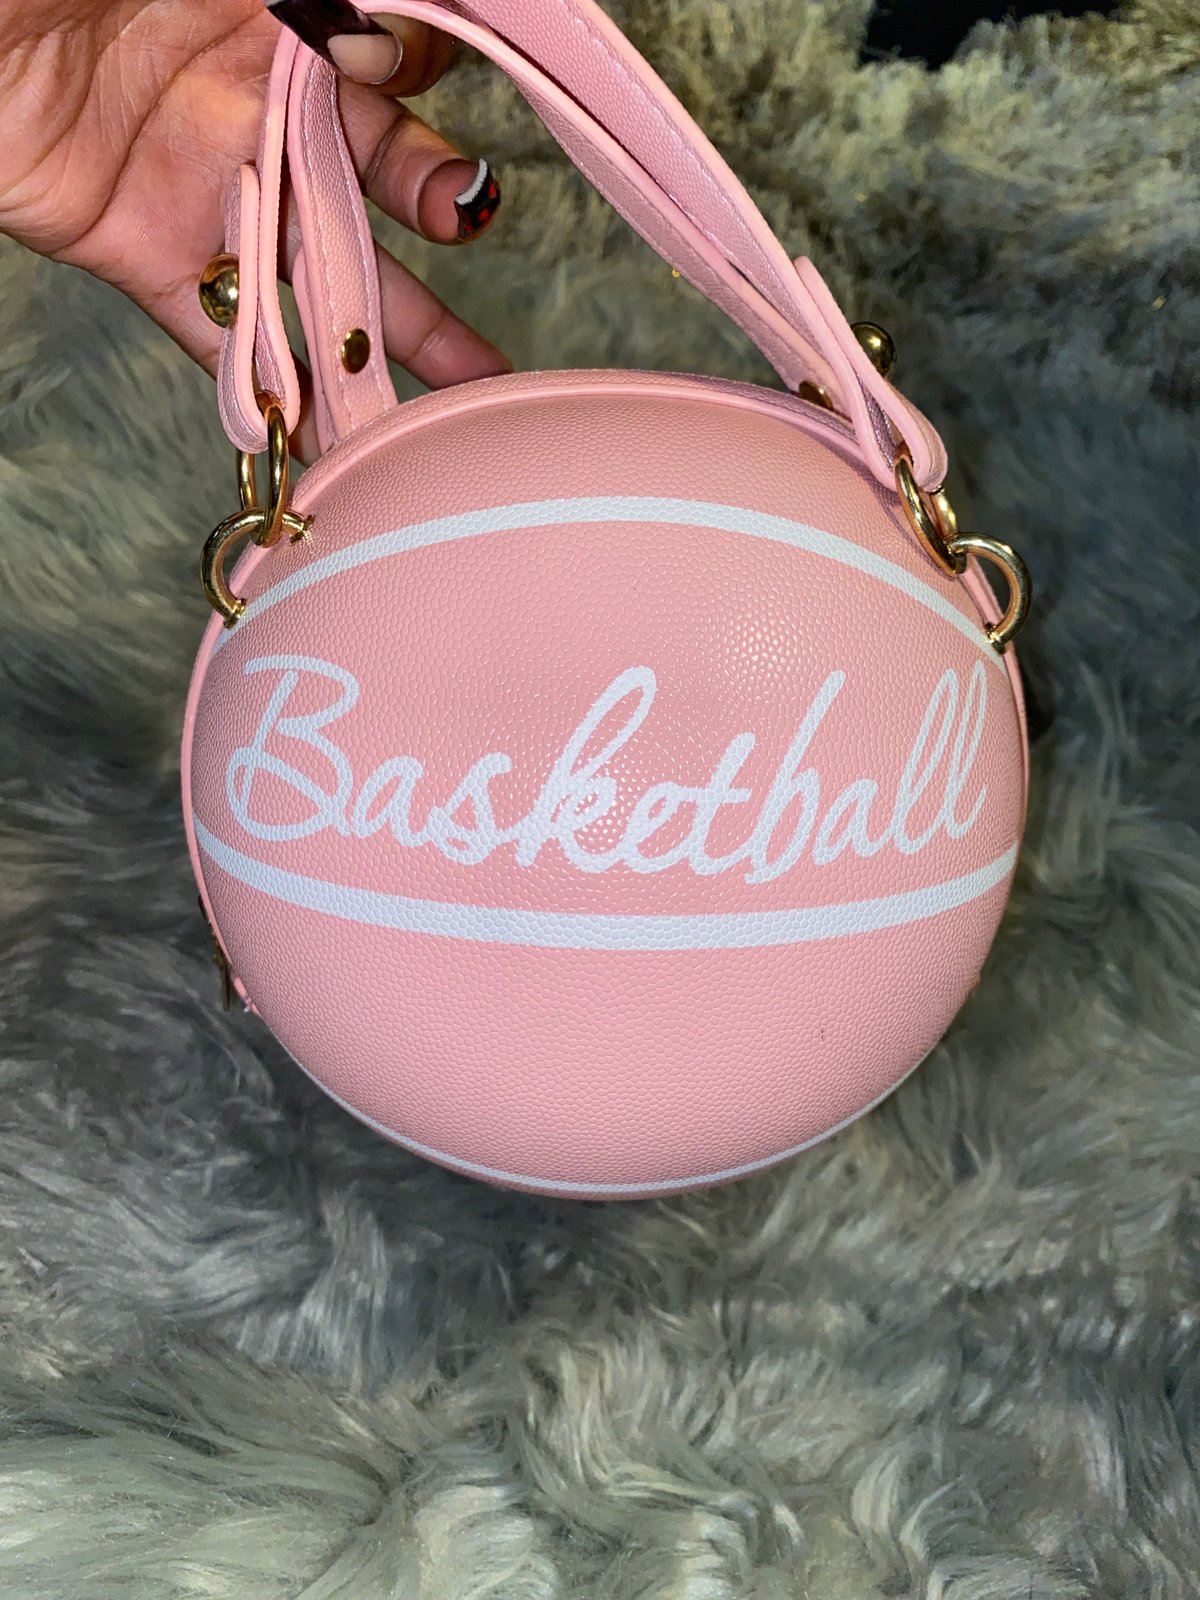 Buy Basketball Shaped Shoulder Messenger Handbags Purse Tote Cross Body PU  Leather Cute Bag Adjustable Strap for Women Girls (Brown) at Amazon.in